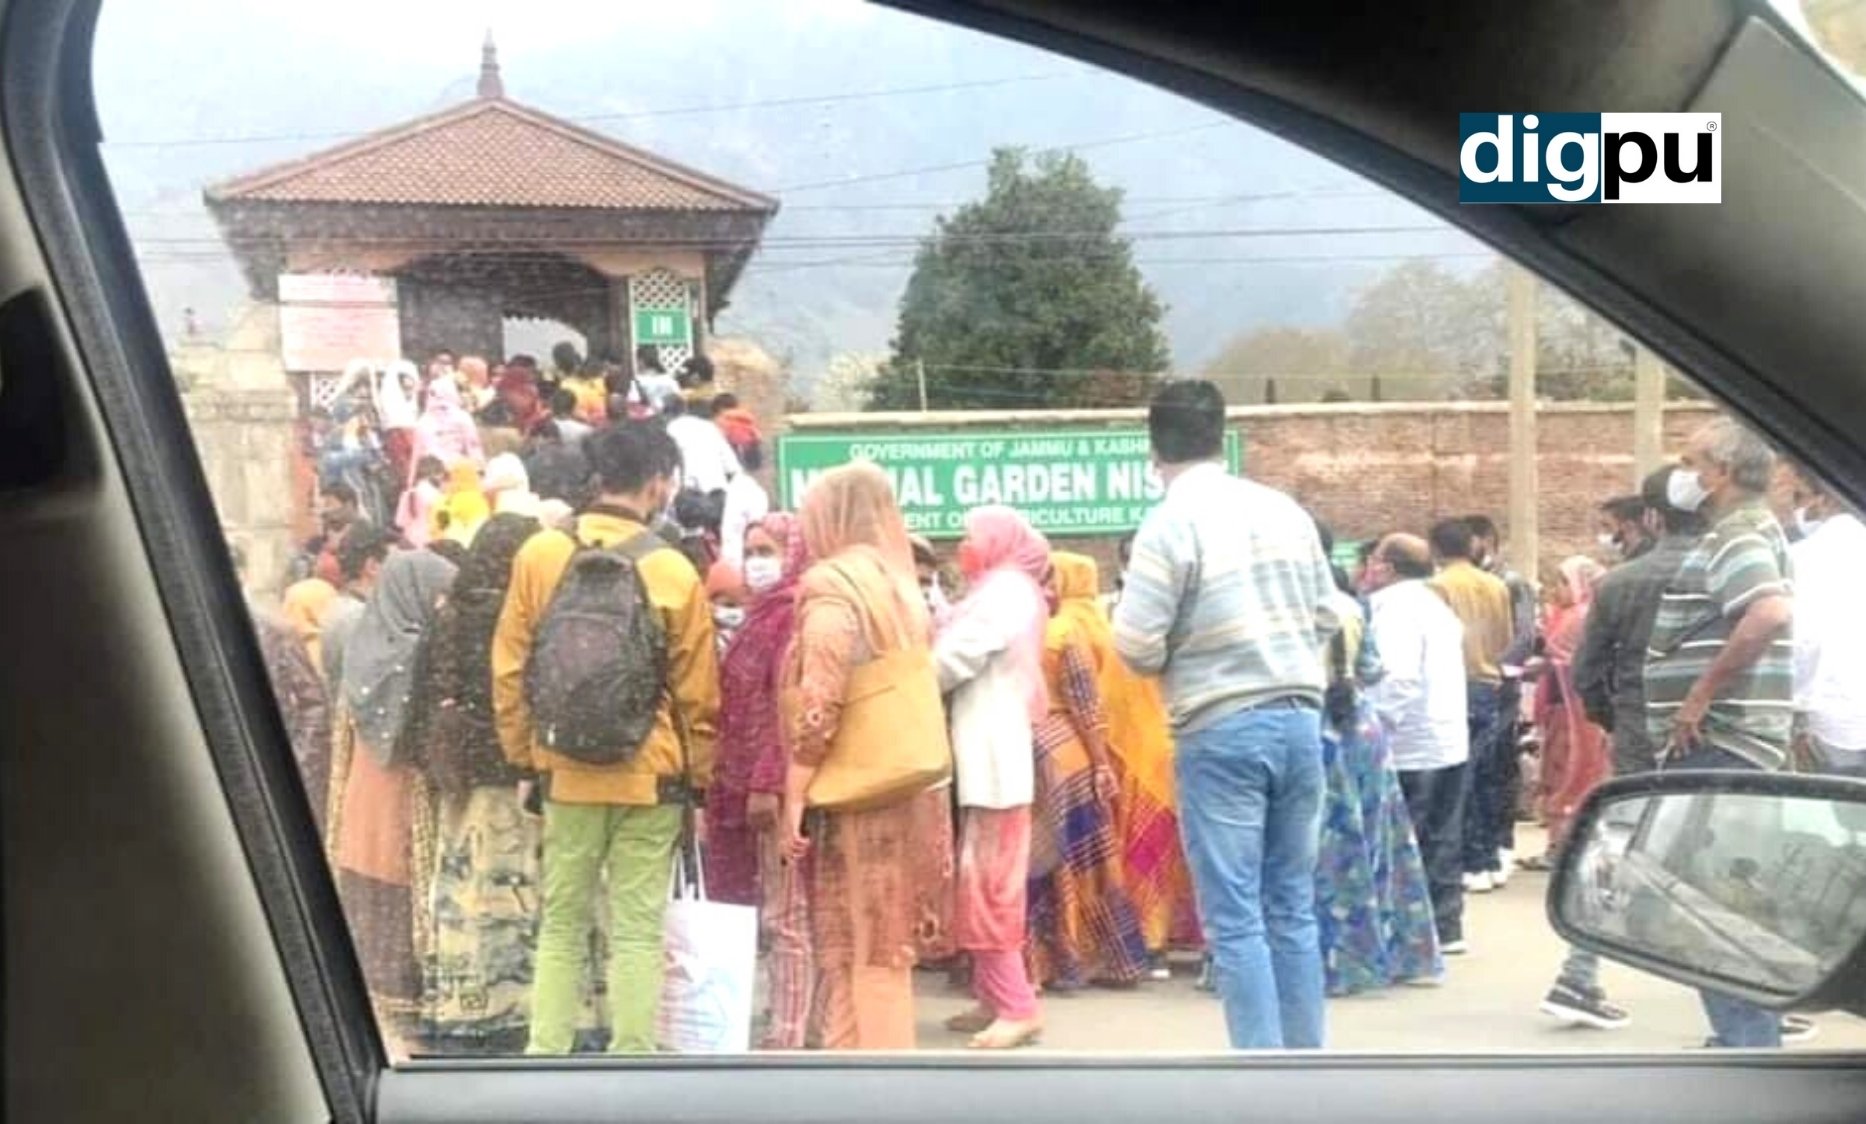 J&K Government orders closure of schools citing spike in COVID-19 cases - Digpu News